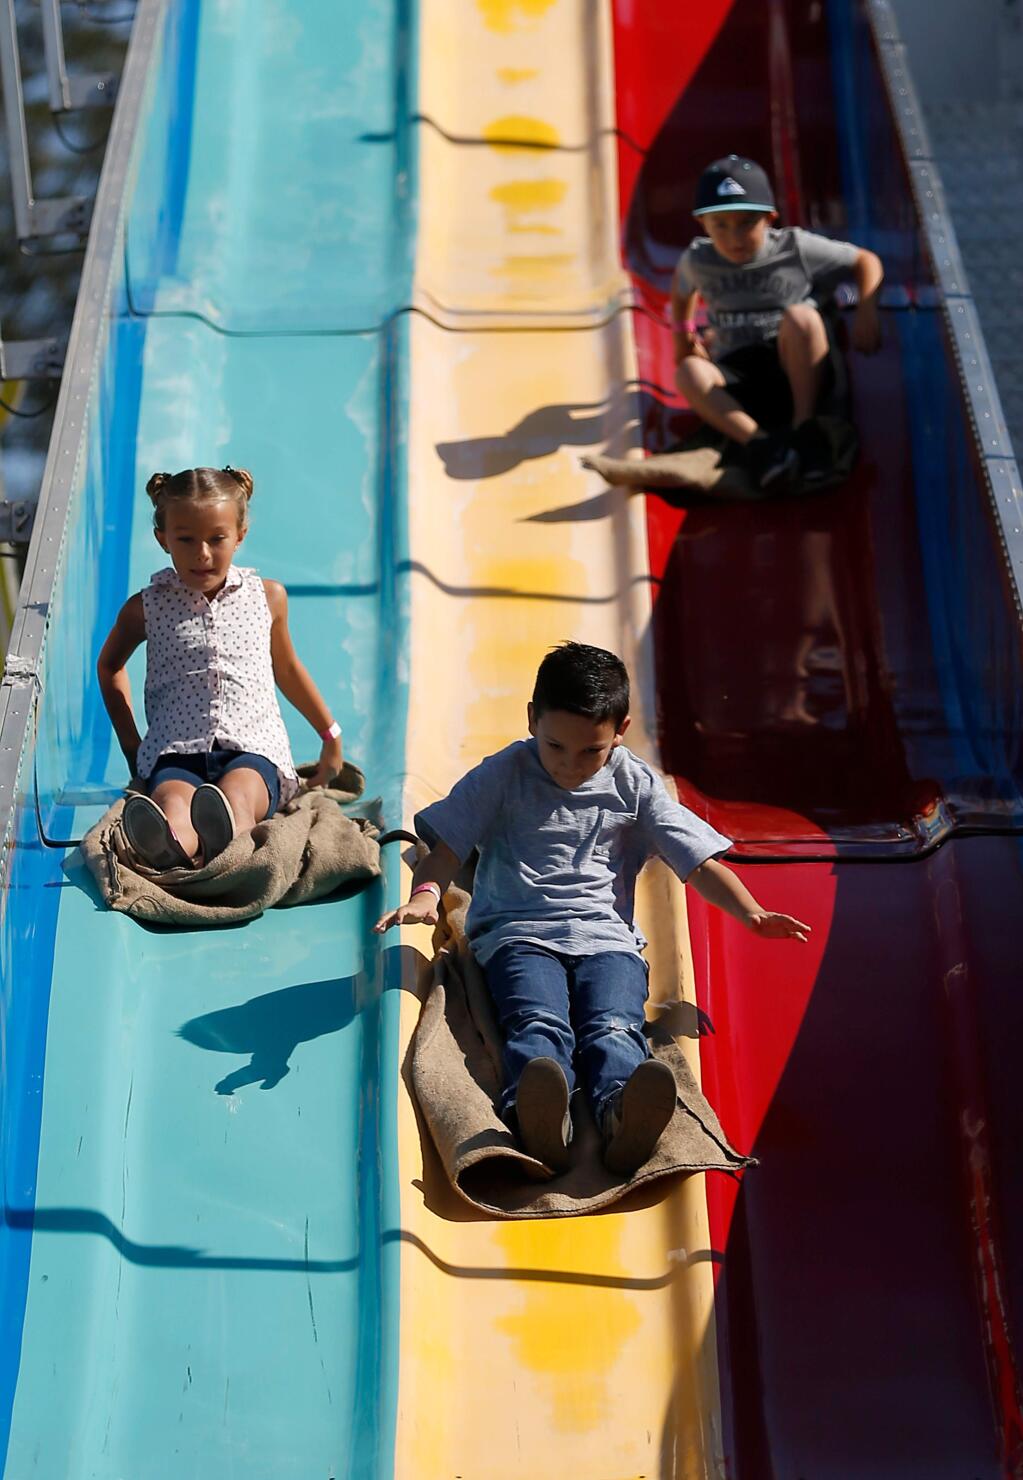 Brokke Rooney, 7, left, David Mendoza, 7, and Liam Rooney, 5, race down the Alpine Slide during the final weekend of the Sonoma County Fair in Santa Rosa, California on Saturday, August 6, 2016. (Alvin Jornada / The Press Democrat)